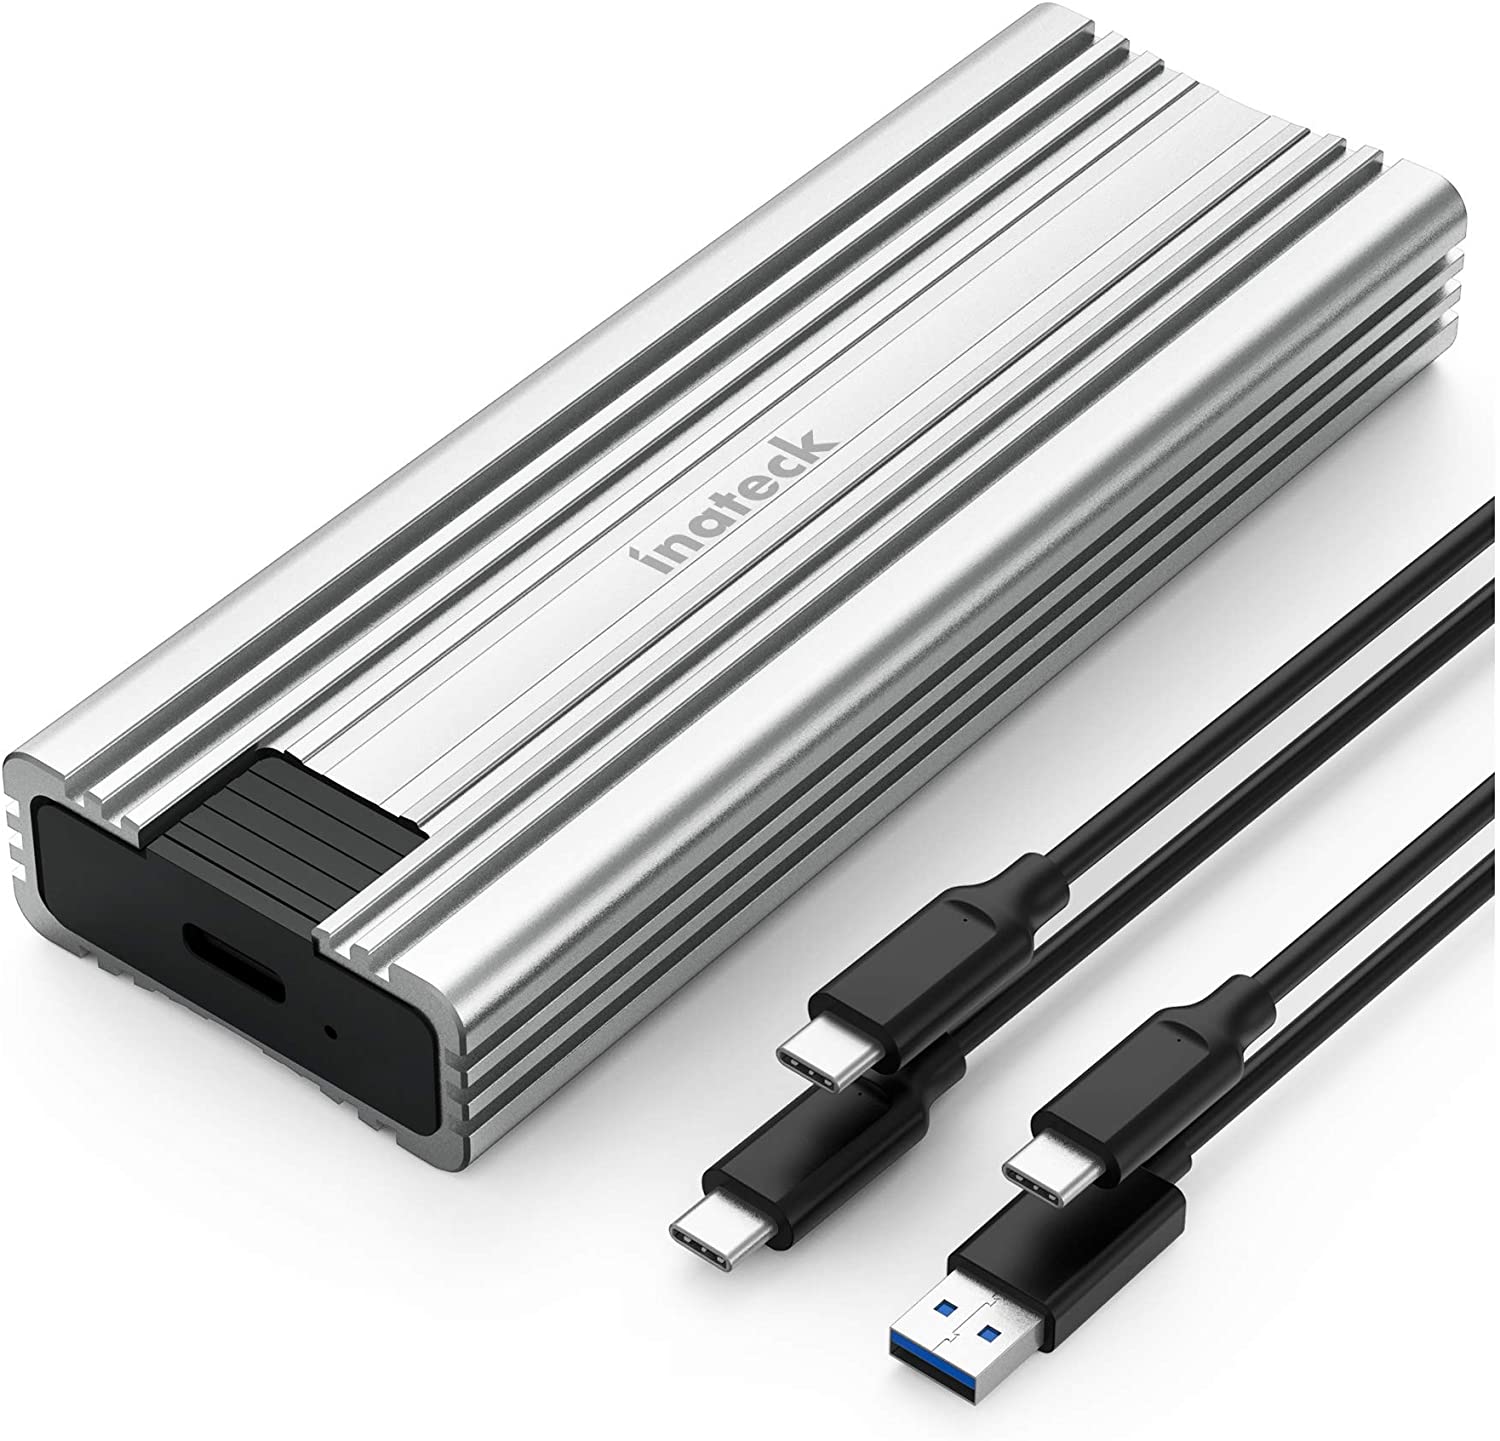 Inateck M.2 NVMe SSD Enclosure, USB 3.2 Gen 2, with 2 x Cable of Type A/Type C, $16.99, 35% Off